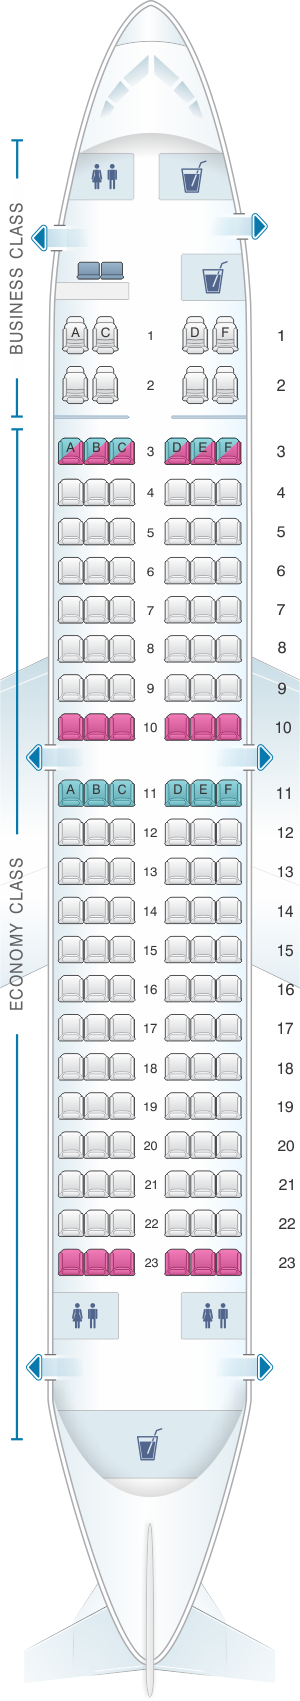 Seat map for TAROM Boeing B737 300 134pax